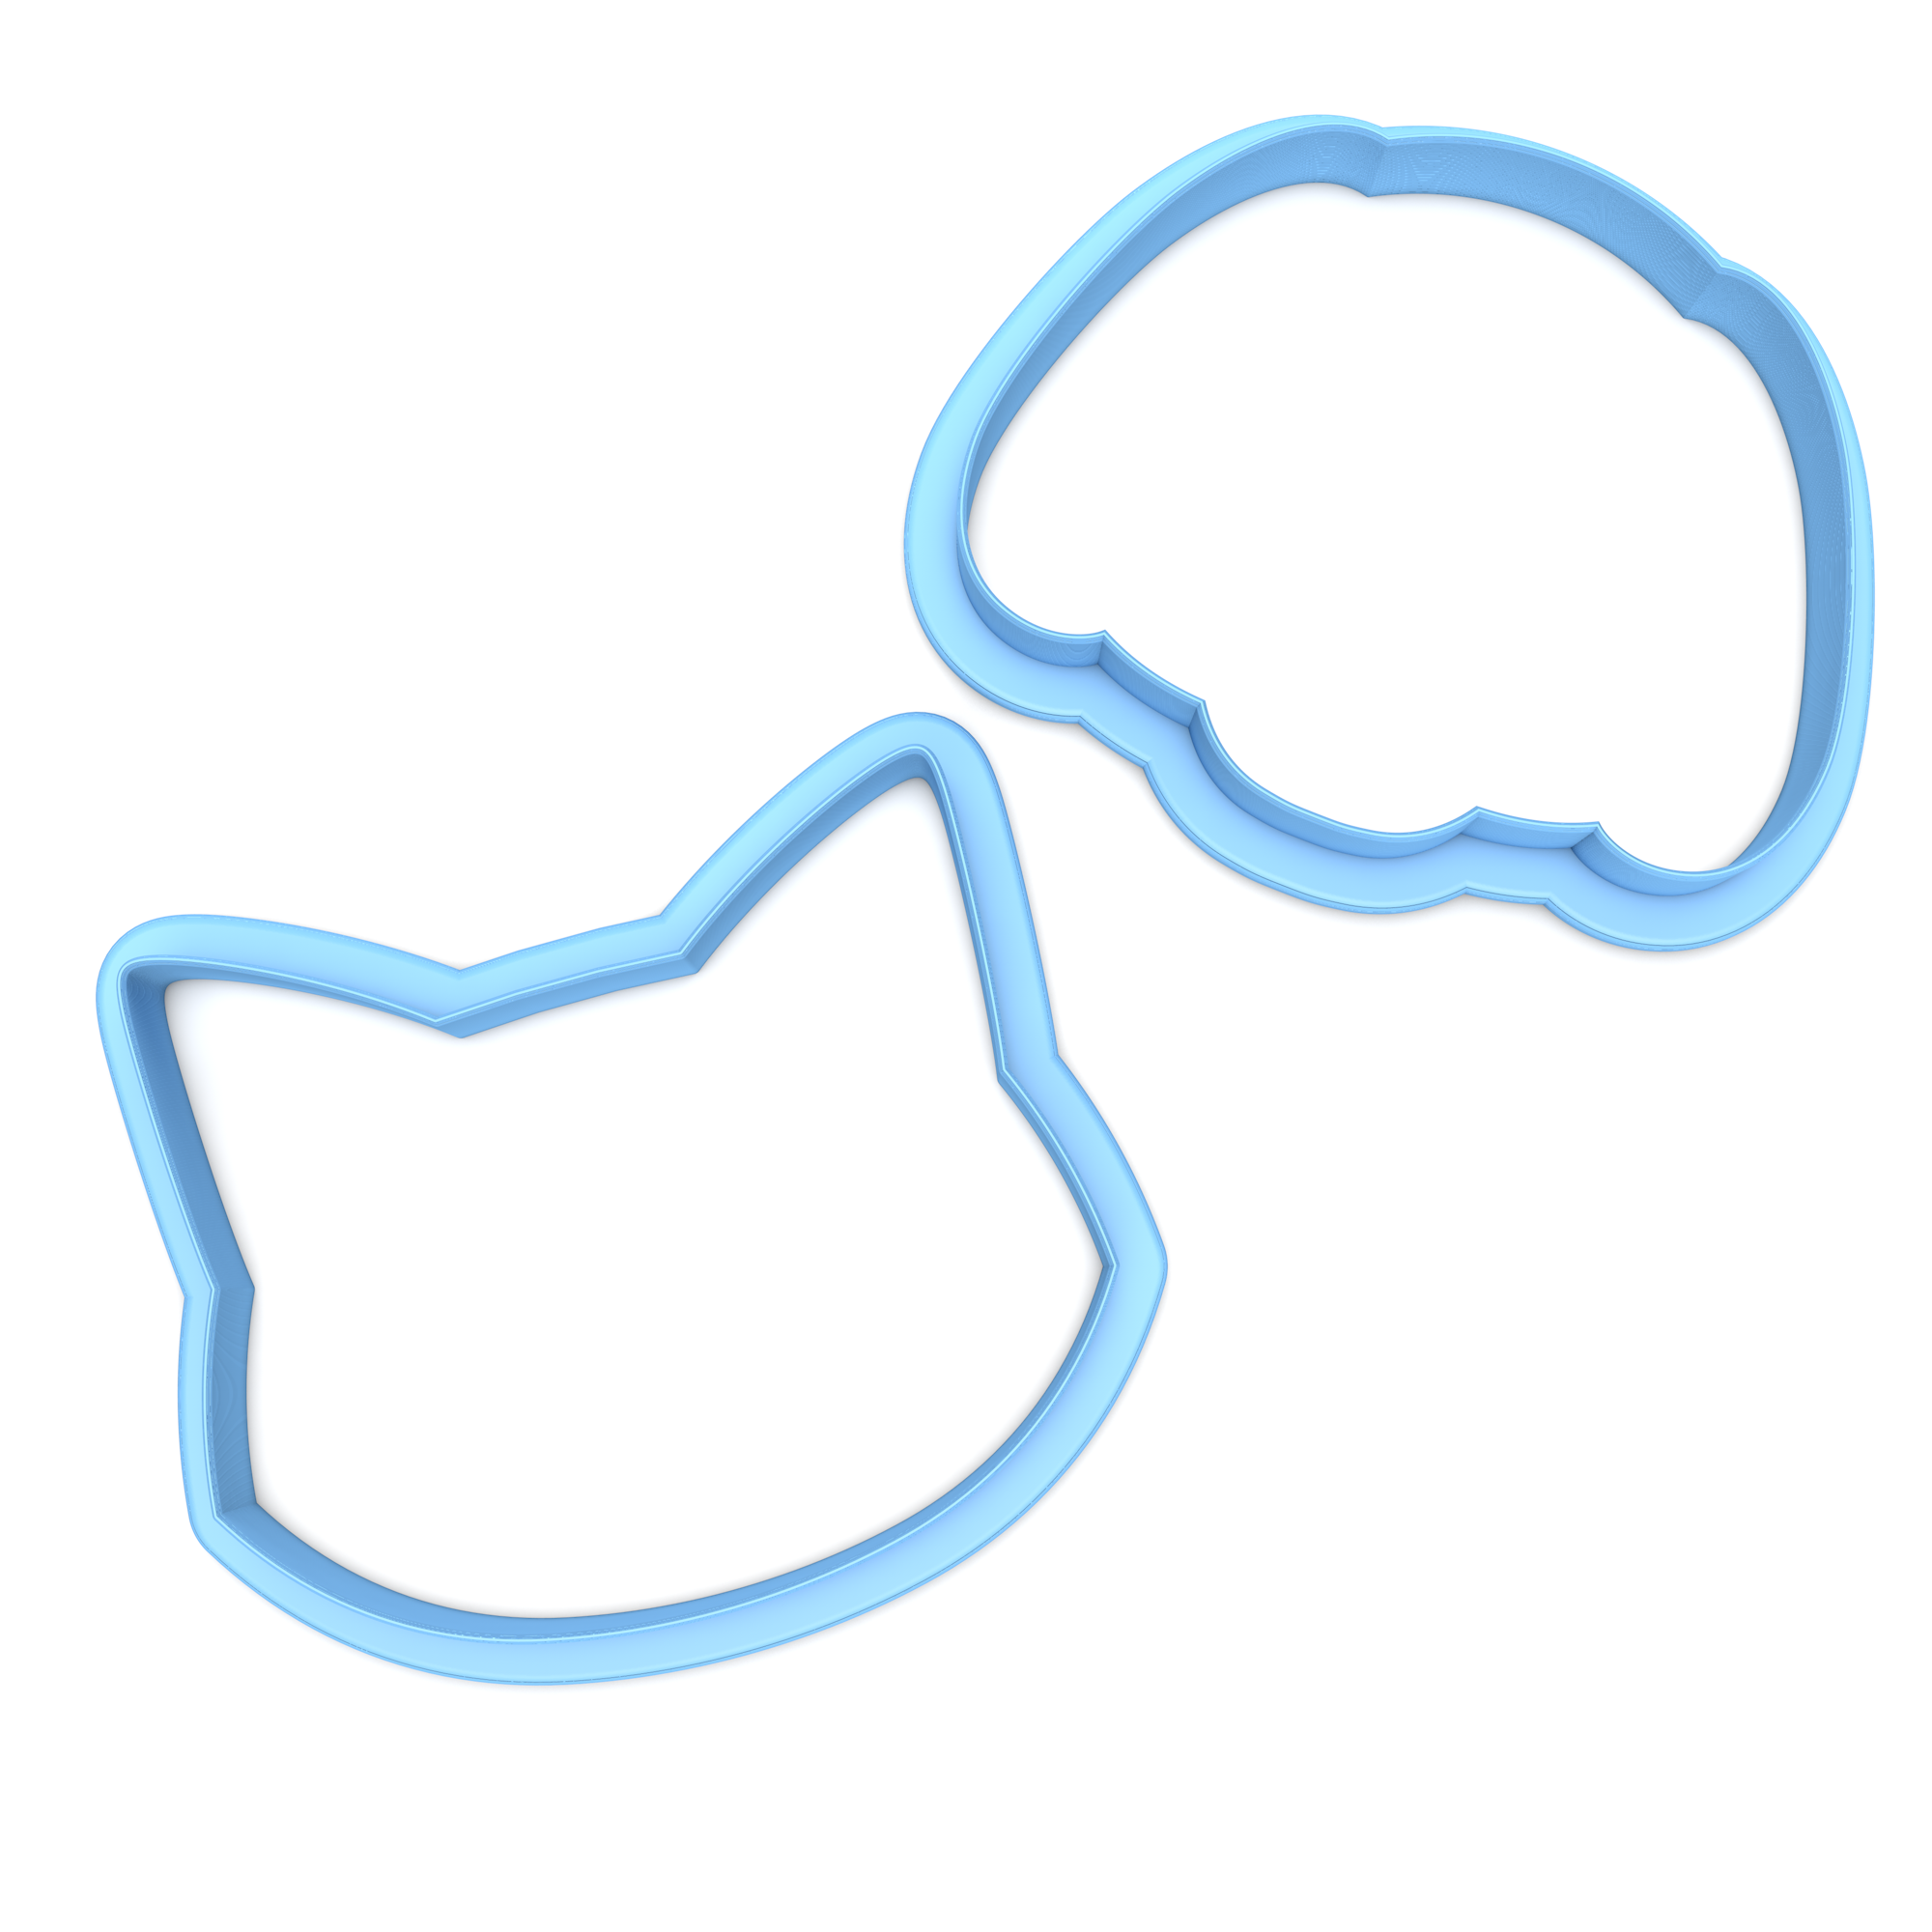 Set of 2 Cat and Dog Face Cookie Cutters/Dishwasher Safe